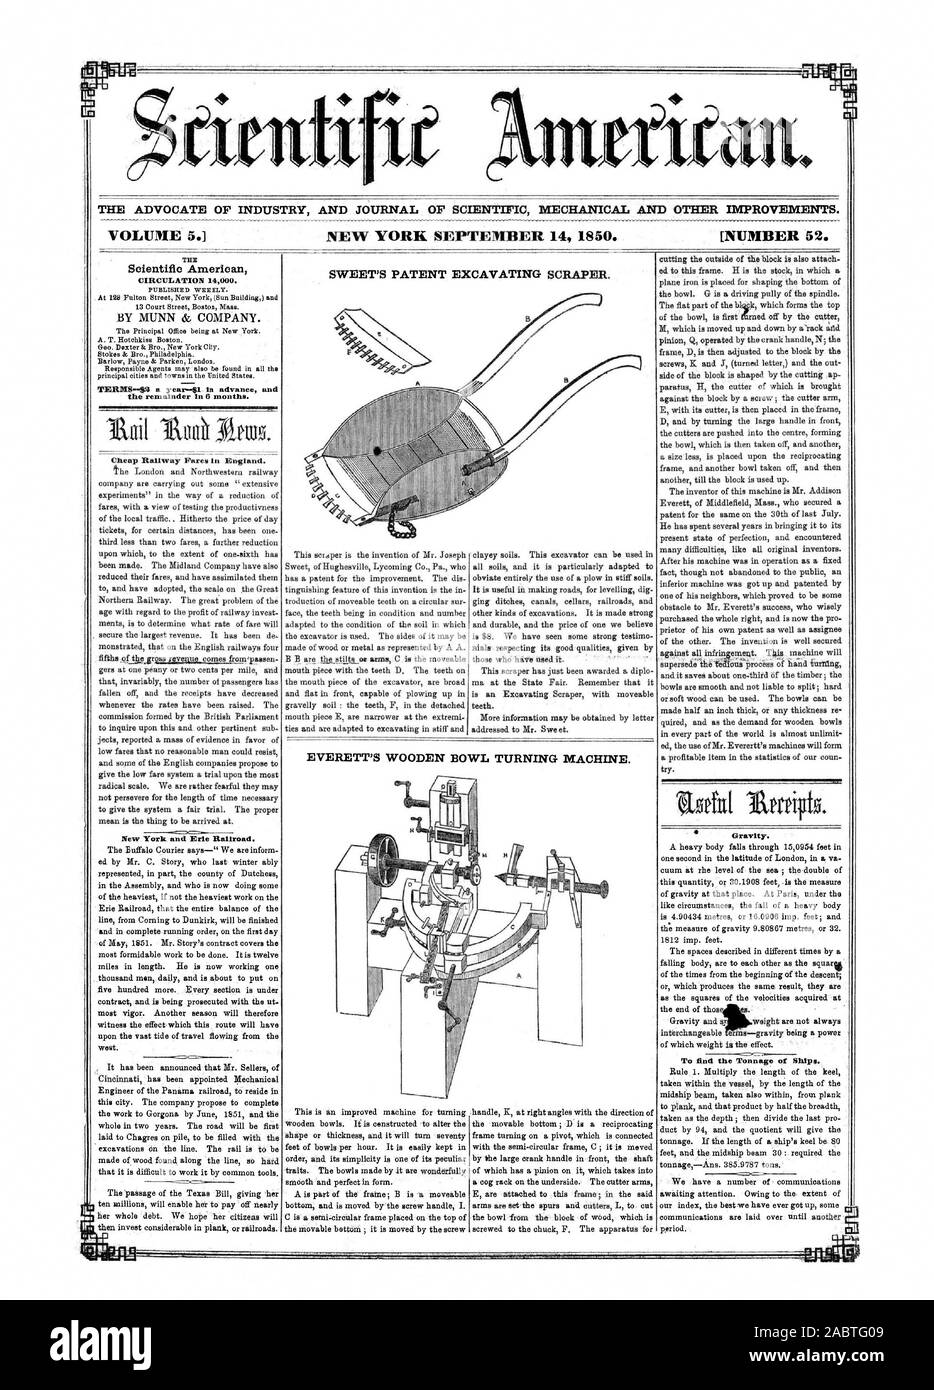 THE ADVOCATE OF INDUSTRY AND JOURNAL OF SCIENTIFIC MECHANICAL AND OTHER IMPROVEMENTS. VOLUME 5.1 NEW YORK SEPTEMBER 14 1850. [NUMBER 52. SWEET'S PATENT EXCAVATING SCRAPER. TEE Scientific American CIRCULATION 14000. the remainder in 6 months. Cheap Railway Fares in England. New York and Erie Railroad. Gravity. To find the Tonnage of Ships. EVERETT'S WOODEN BOWL TURNING MACHINE., 1850-09-14 Stock Photo